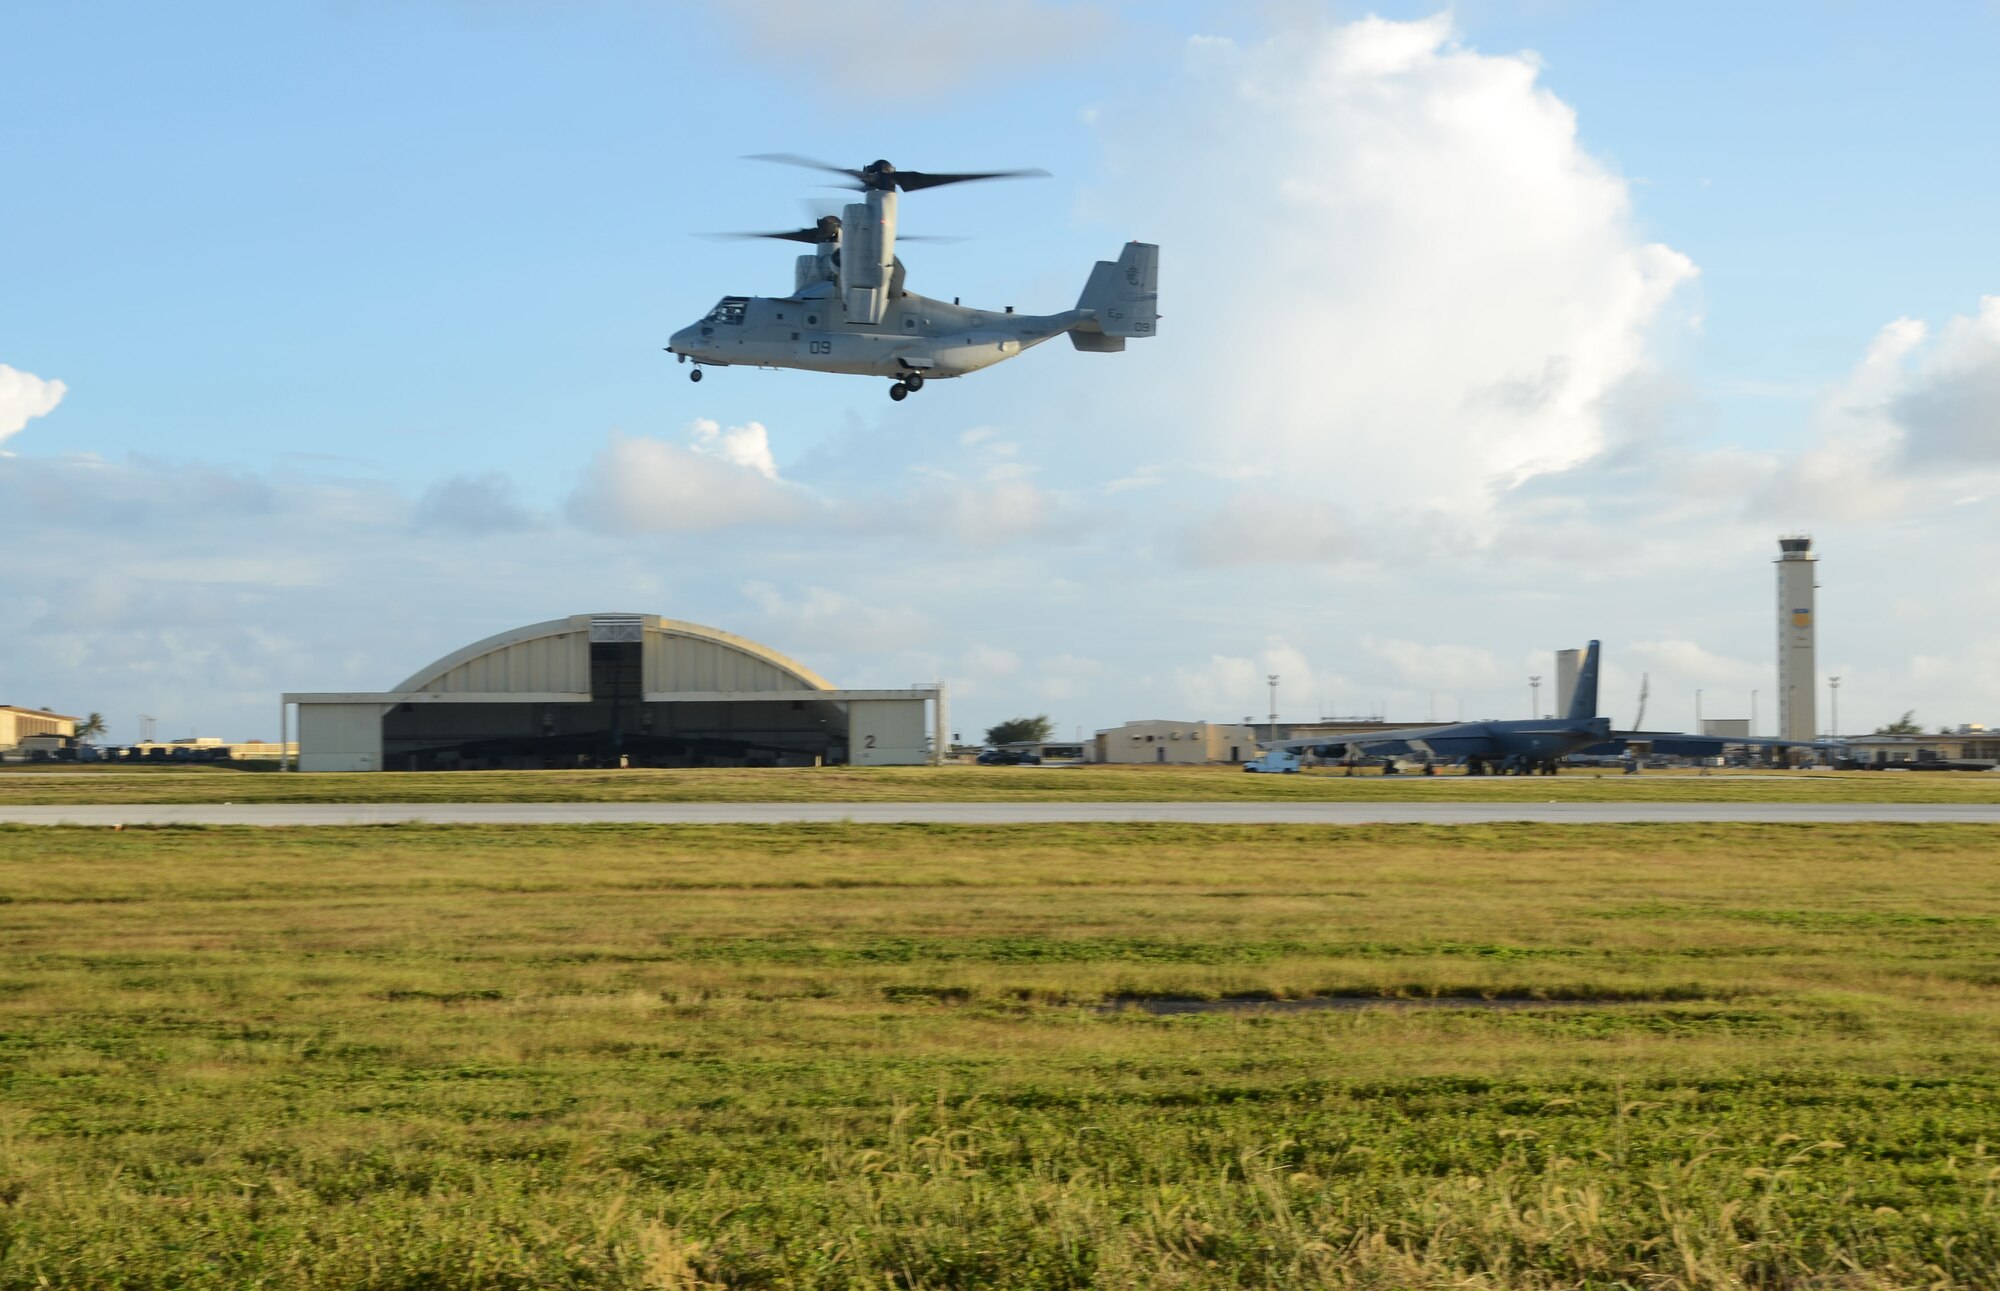 ANDERSEN AIR FORCE BASE, Guam—A U.S. Marine Corps MV-22B Osprey from Marine Corps Air Station Futenma, Okinawa, Japan, prepares to land on Andersen Air Force Base, Guam, December 7, 2012. Three Ospreys traveled to Guam in support of Exercise Forager Fury 2012.  This is the first exercise the Ospreys have participated in since replacing the CH-46 helicopters in Okinawa. (U.S. Air Force photo by Senior Airman Benjamin Wiseman/Released)